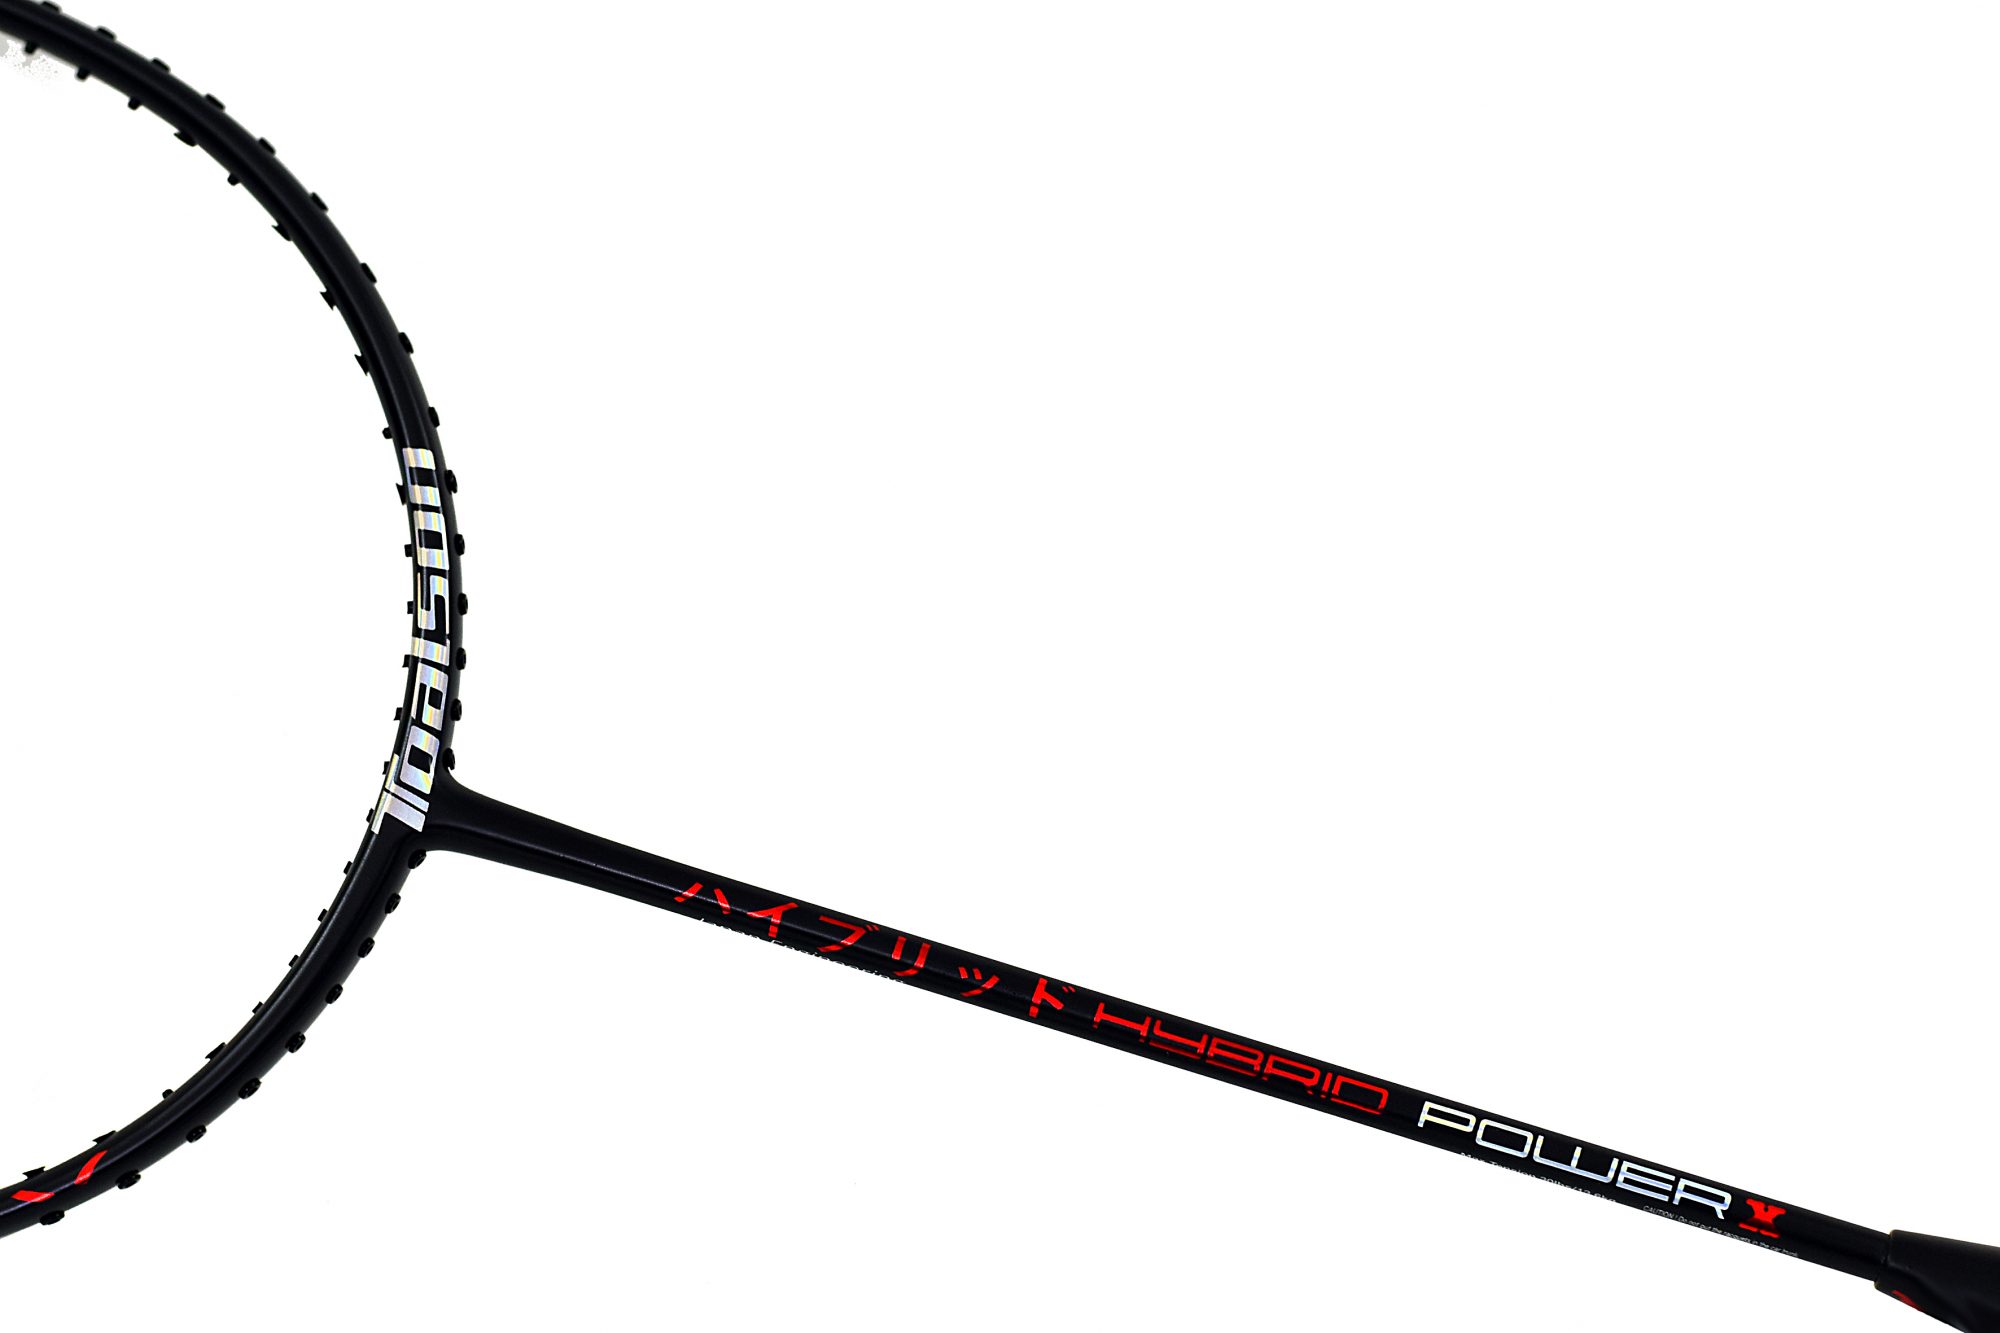 Toalson Tennis and Badminton Racket